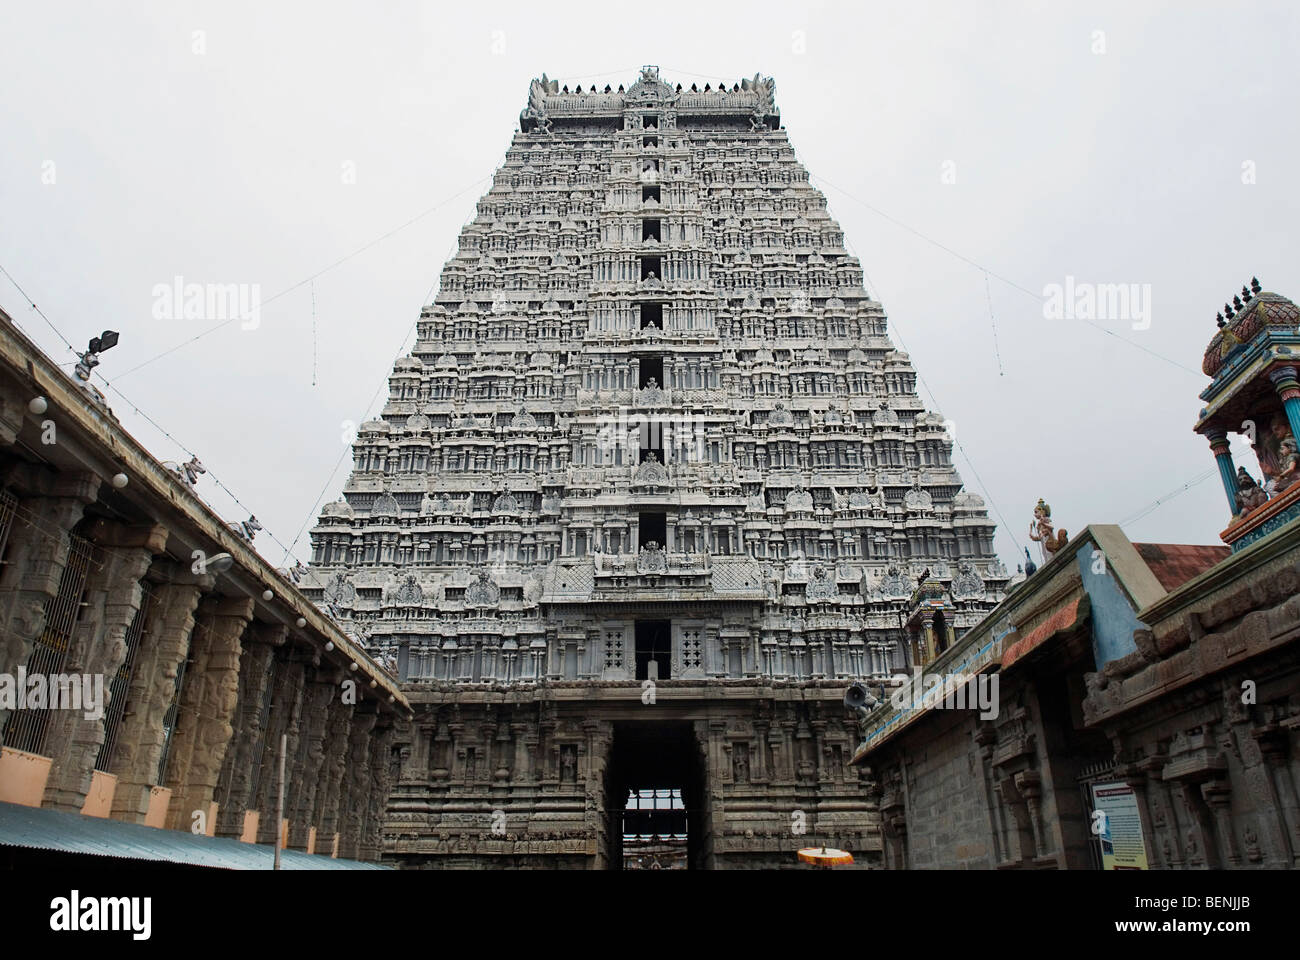 The Arunachaleshwara Temple built between the 9th and 13th century is a Hindu temple dedicated to Lord Shiva located at the Stock Photo